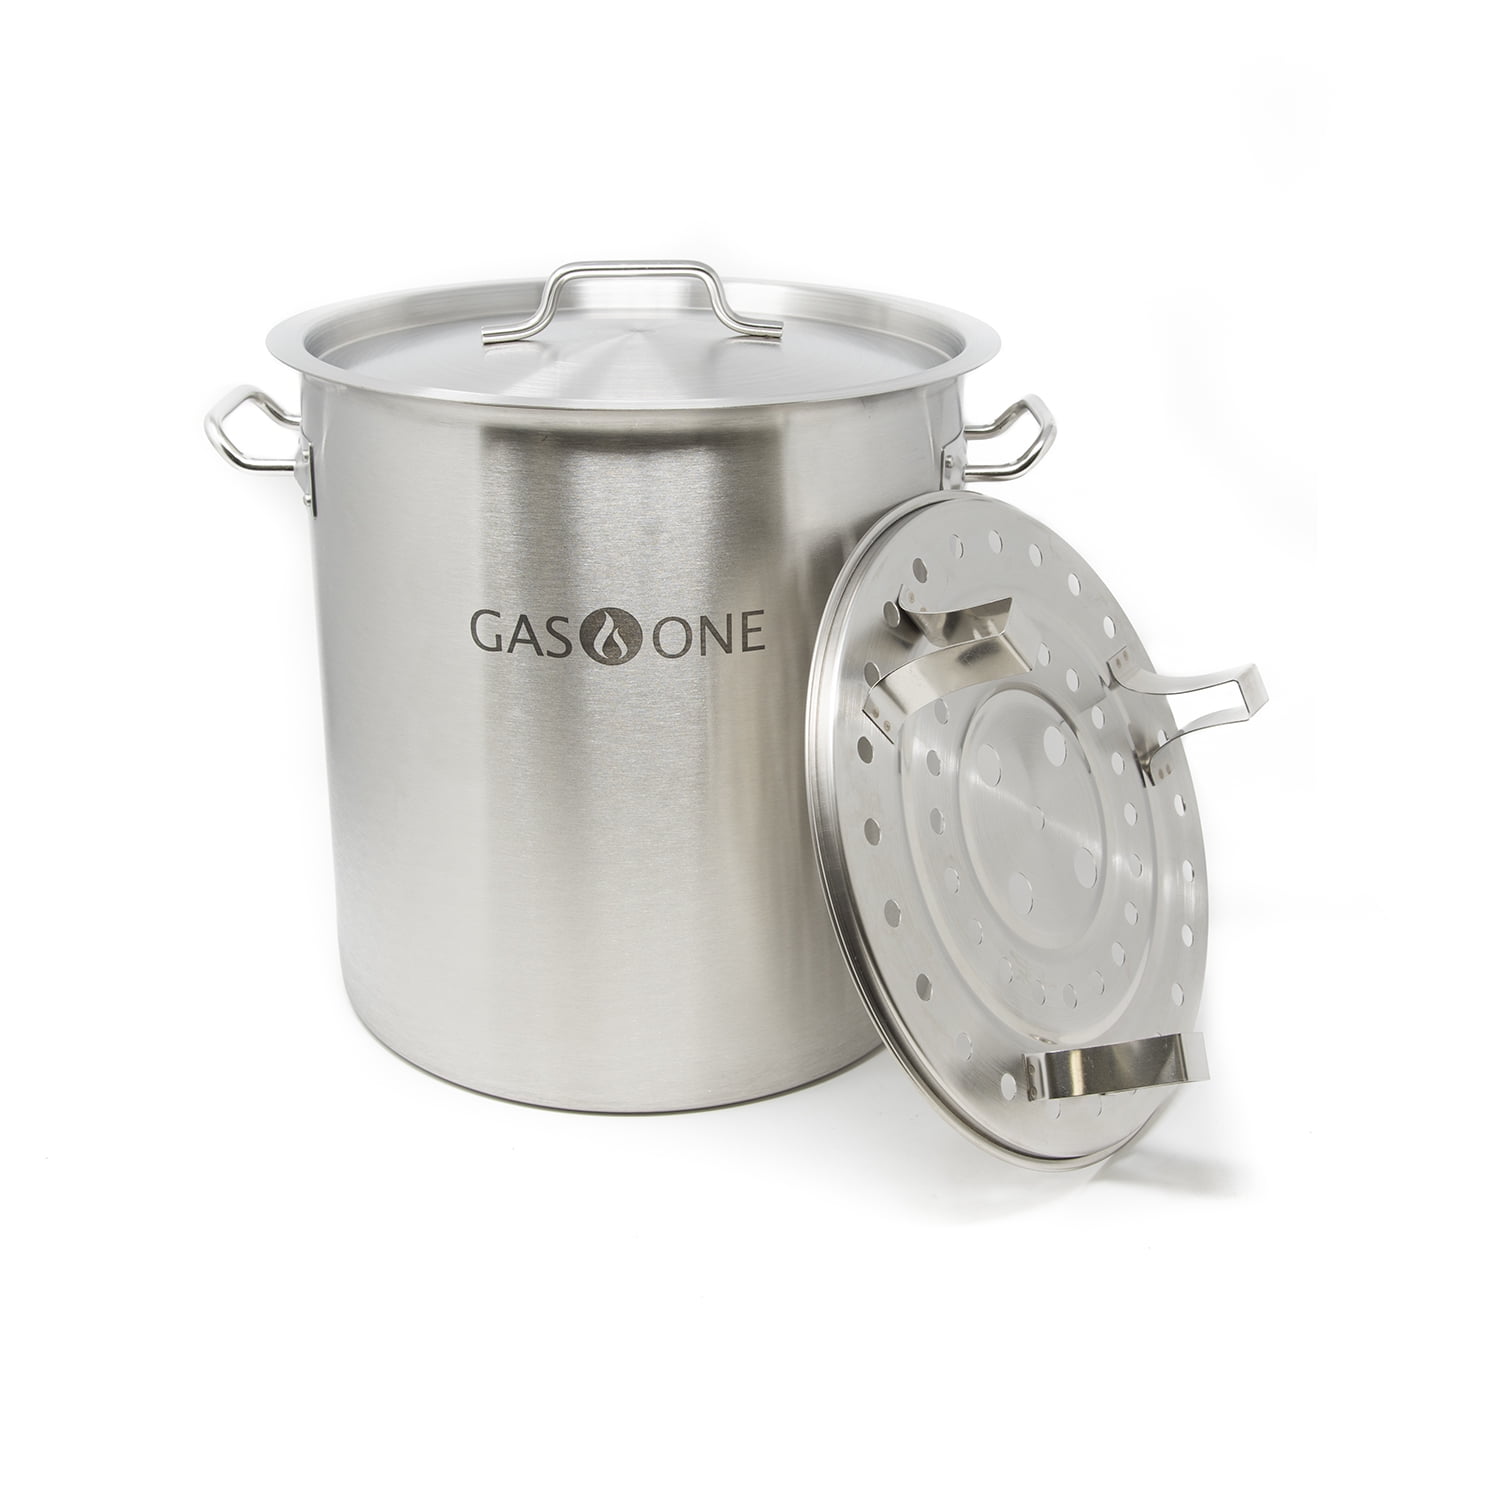 Gas One Stainless Steel Stock Pot with Steamer 8 Gallon with lid/cover & Steamer Rack Crab Pot/Steamer Thickness 1mm Perfect for Homebrewing & Boiling Sap for Maple Syrup Dumpling Crawfish Tamale 